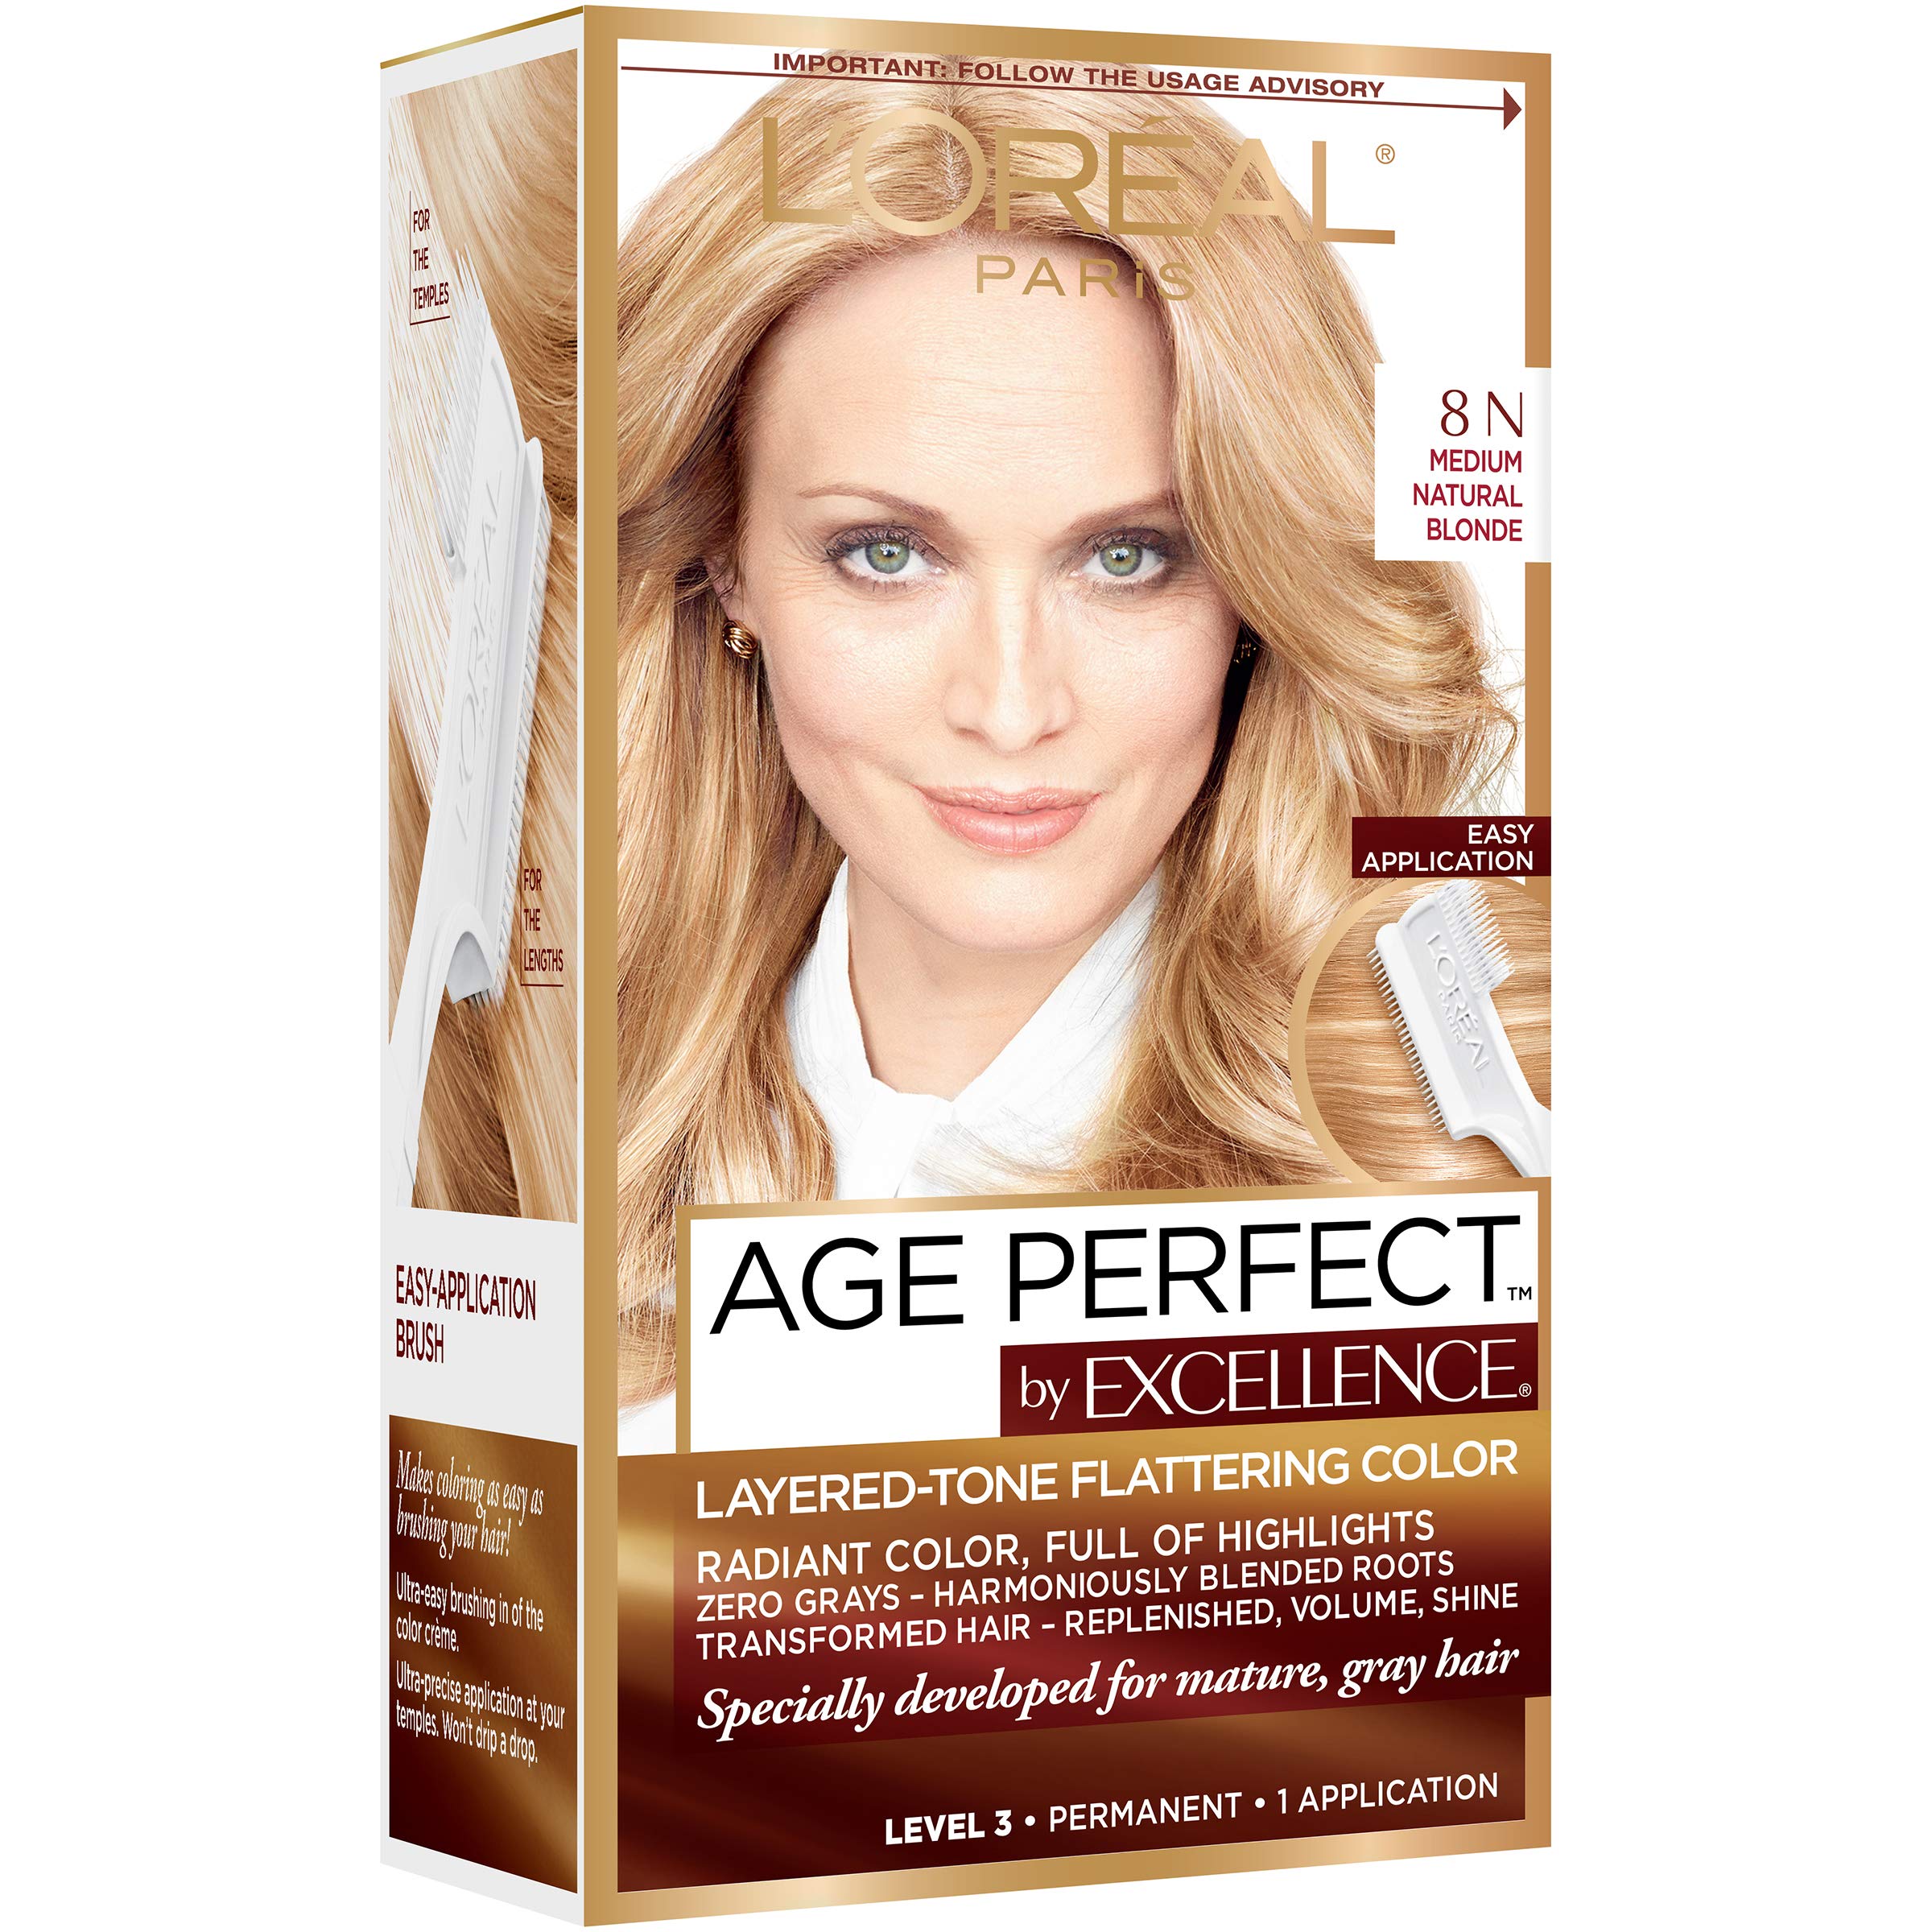 L'Oreal Paris Excellence Age Perfect Layered Tone Flattering Color, 8N Medium Natural Blonde Set (Packaging May Vary)